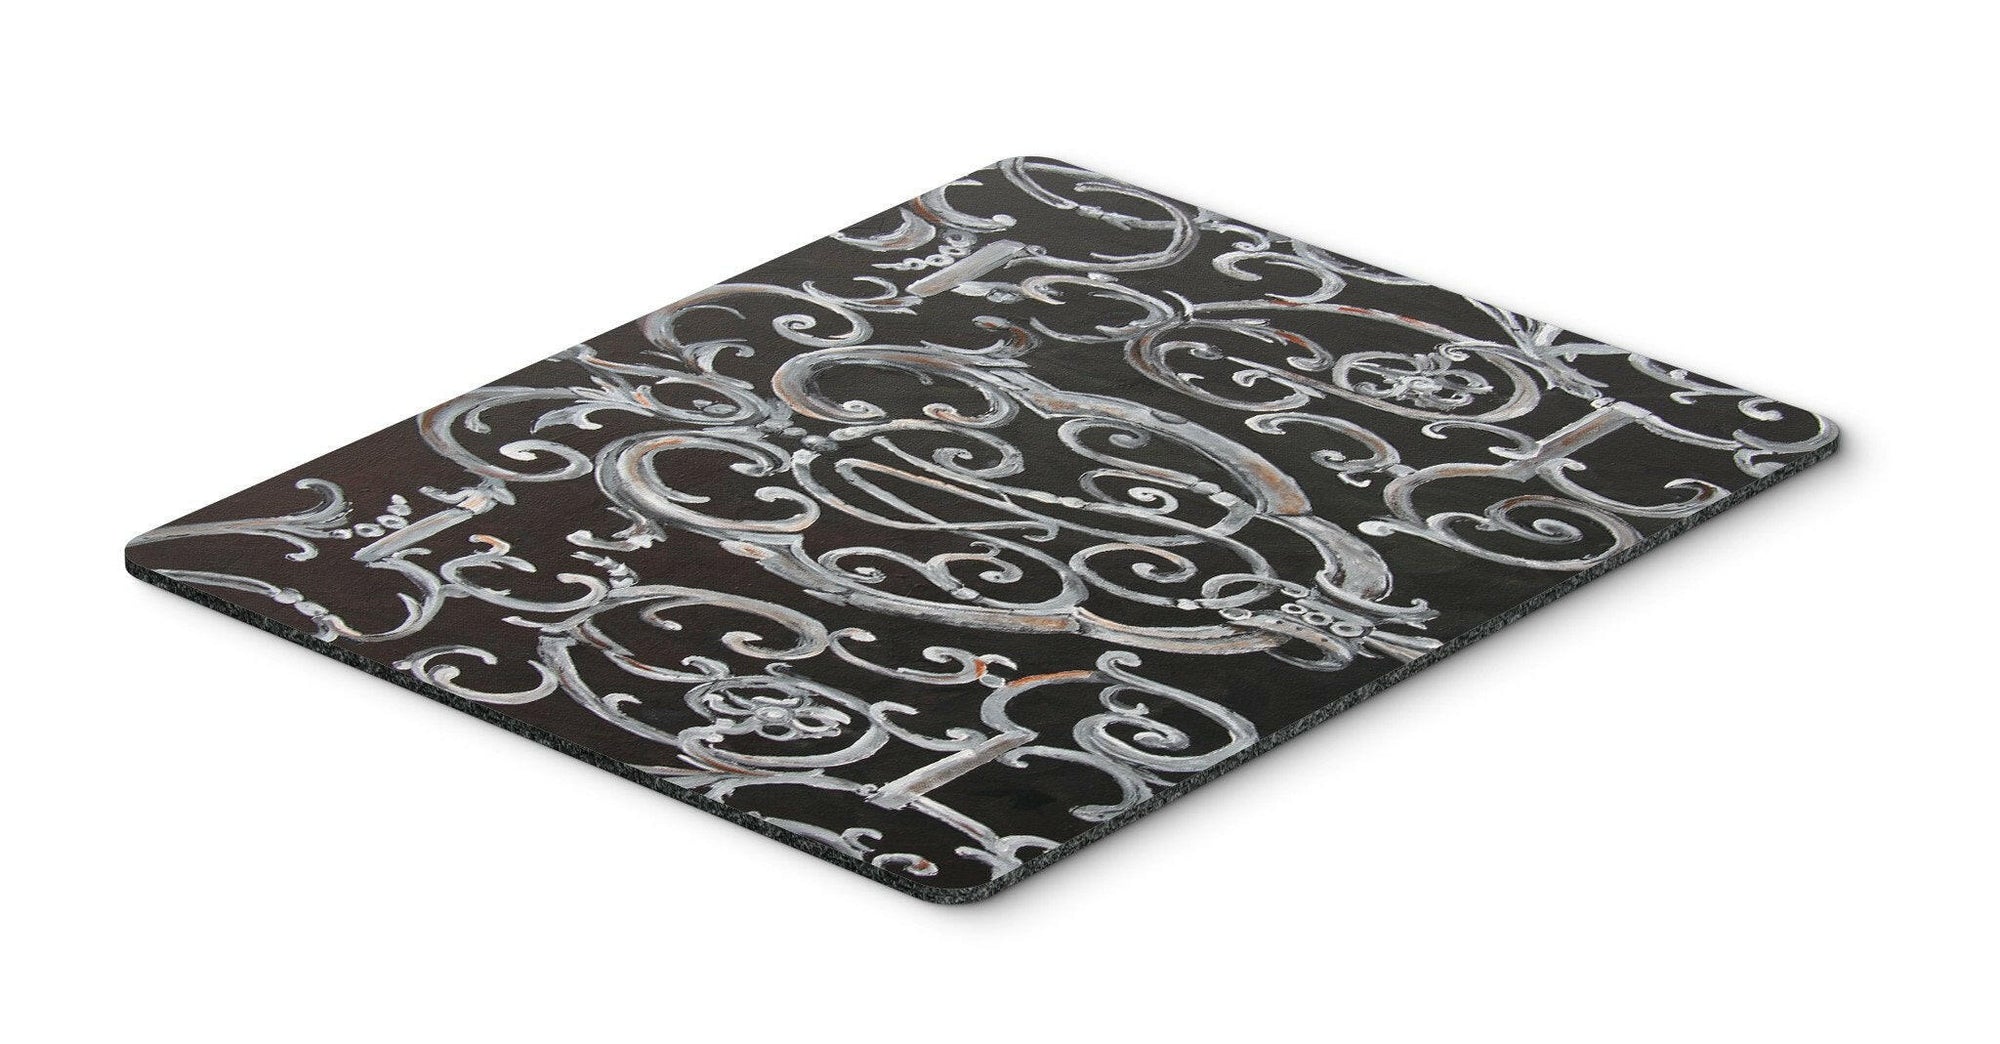 Ironwork Fence Mouse Pad, Hot Pad or Trivet 8927MP by Caroline's Treasures